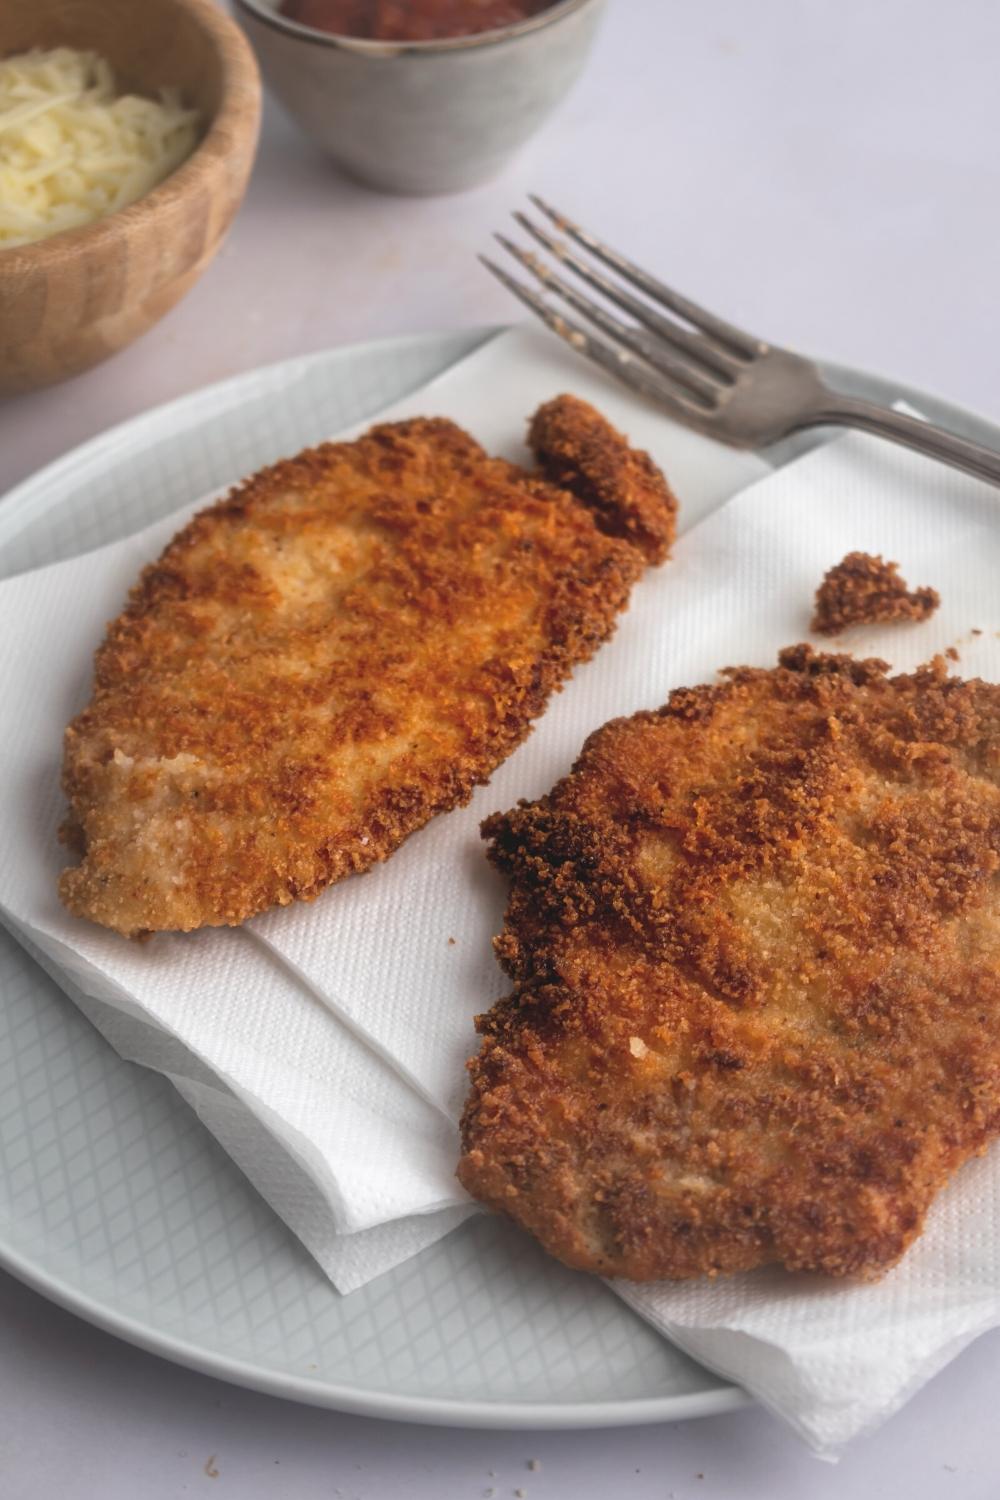 Two pieces of breaded chicken on paper towels on a plate.